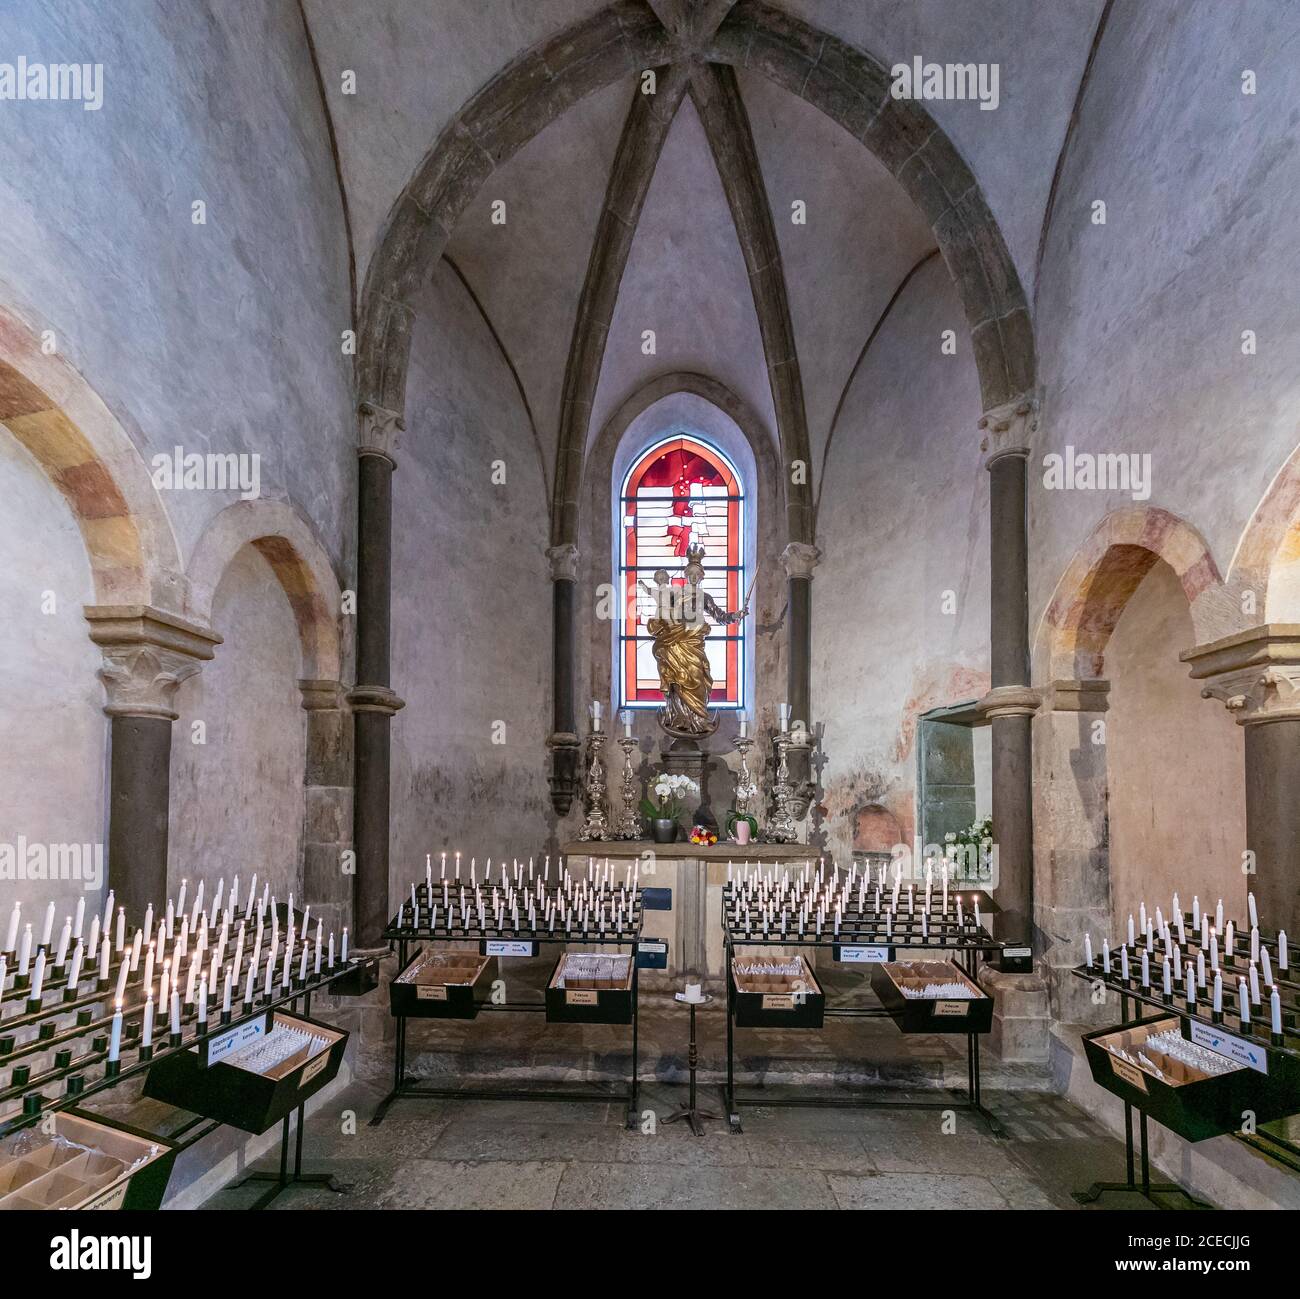 Limburg, Hessen / Germany - 1 August 2020: interior view of the historic Limburg cathedral with a view of the chapel Stock Photo